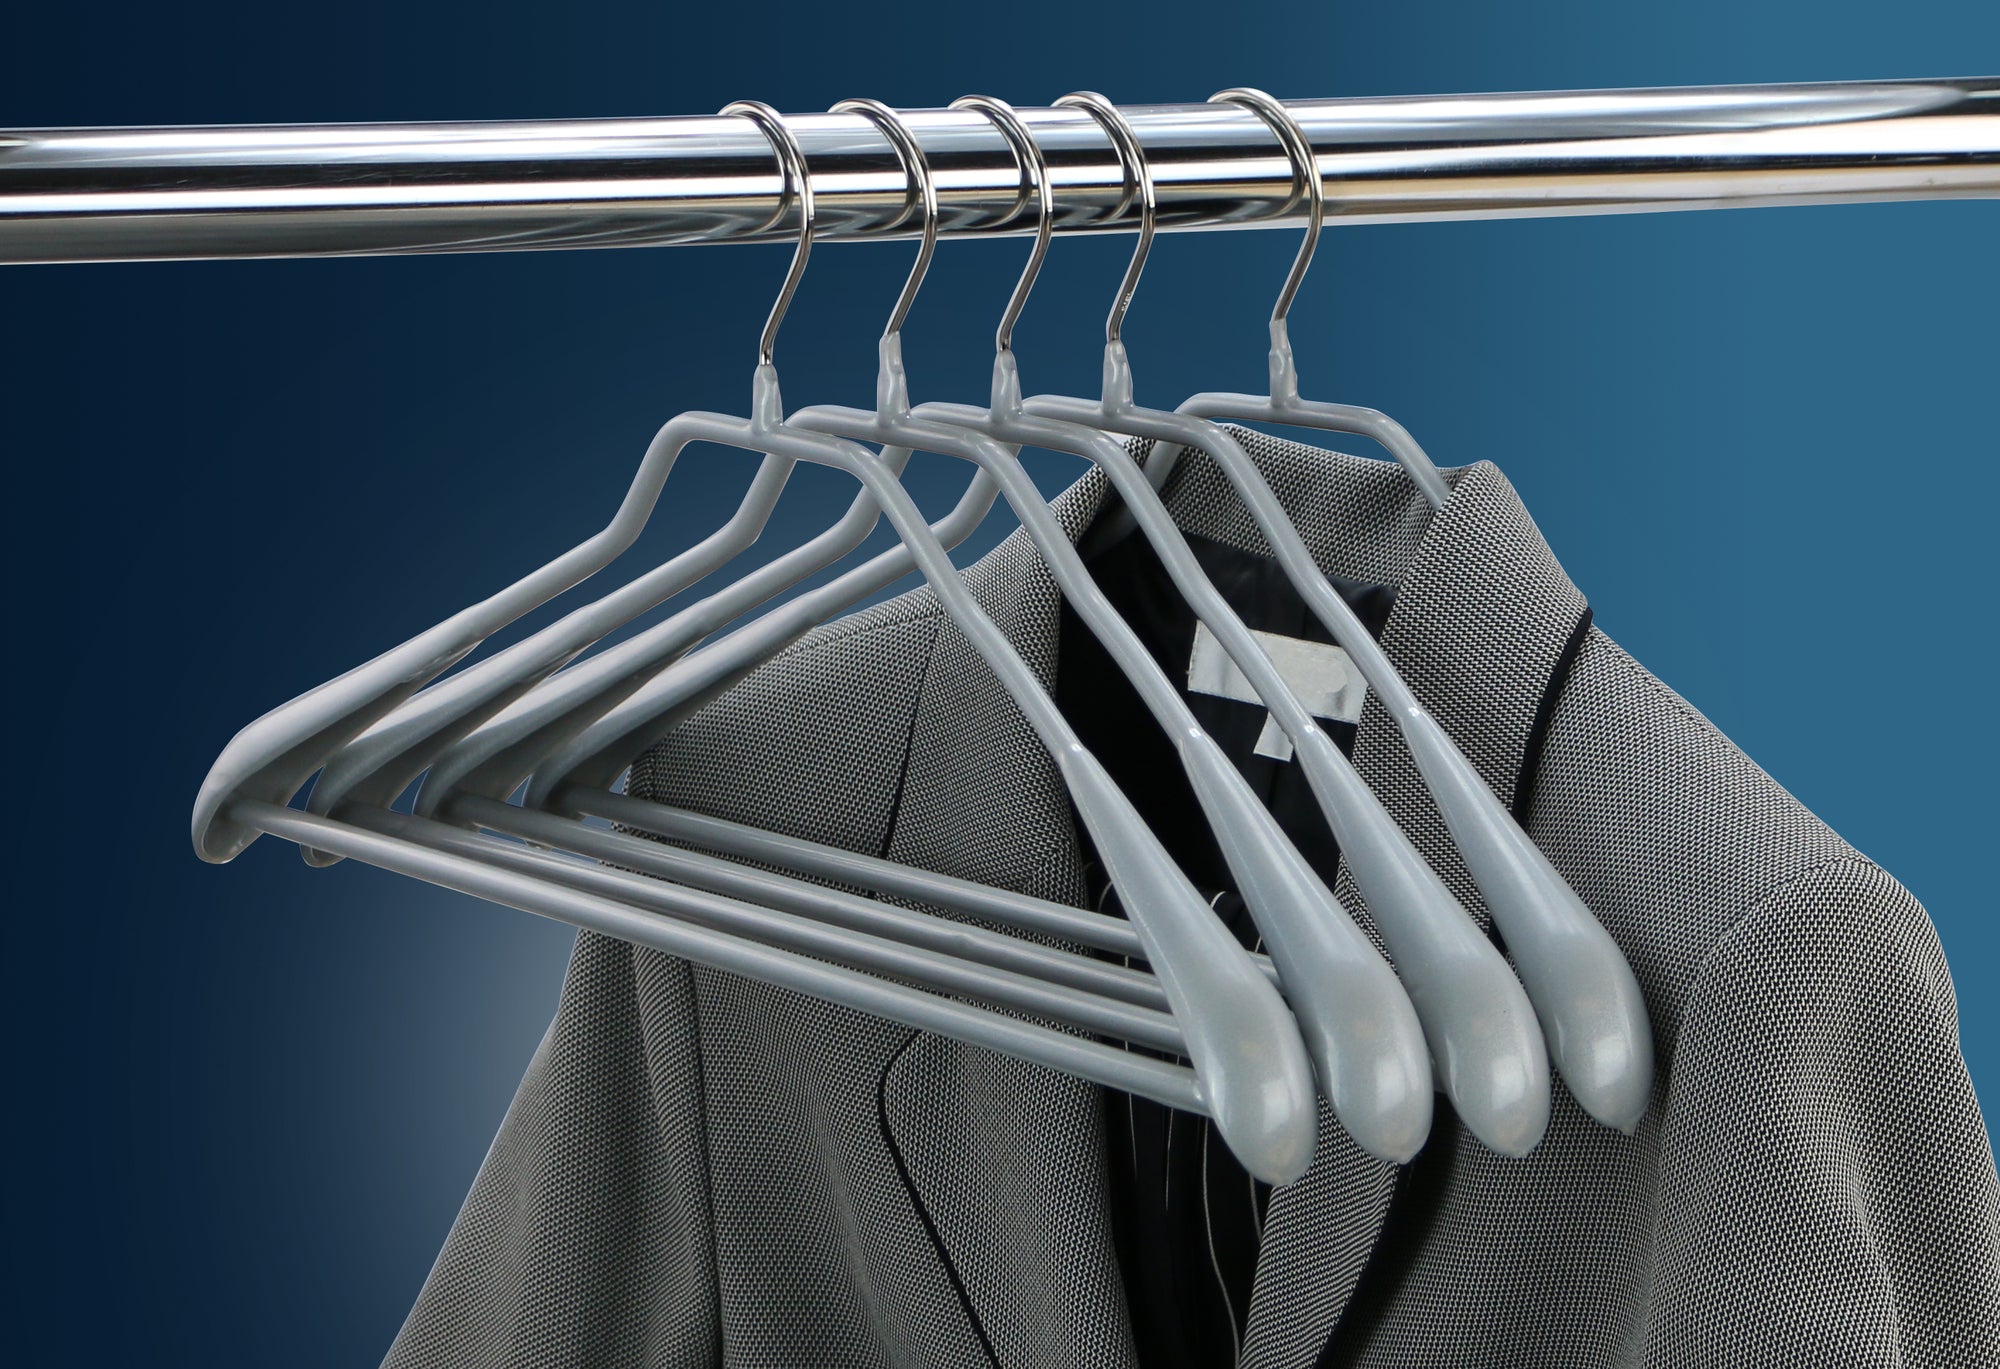 MAWA, Bodyform Shape Clothing Hanger with Wide Shoulder Support